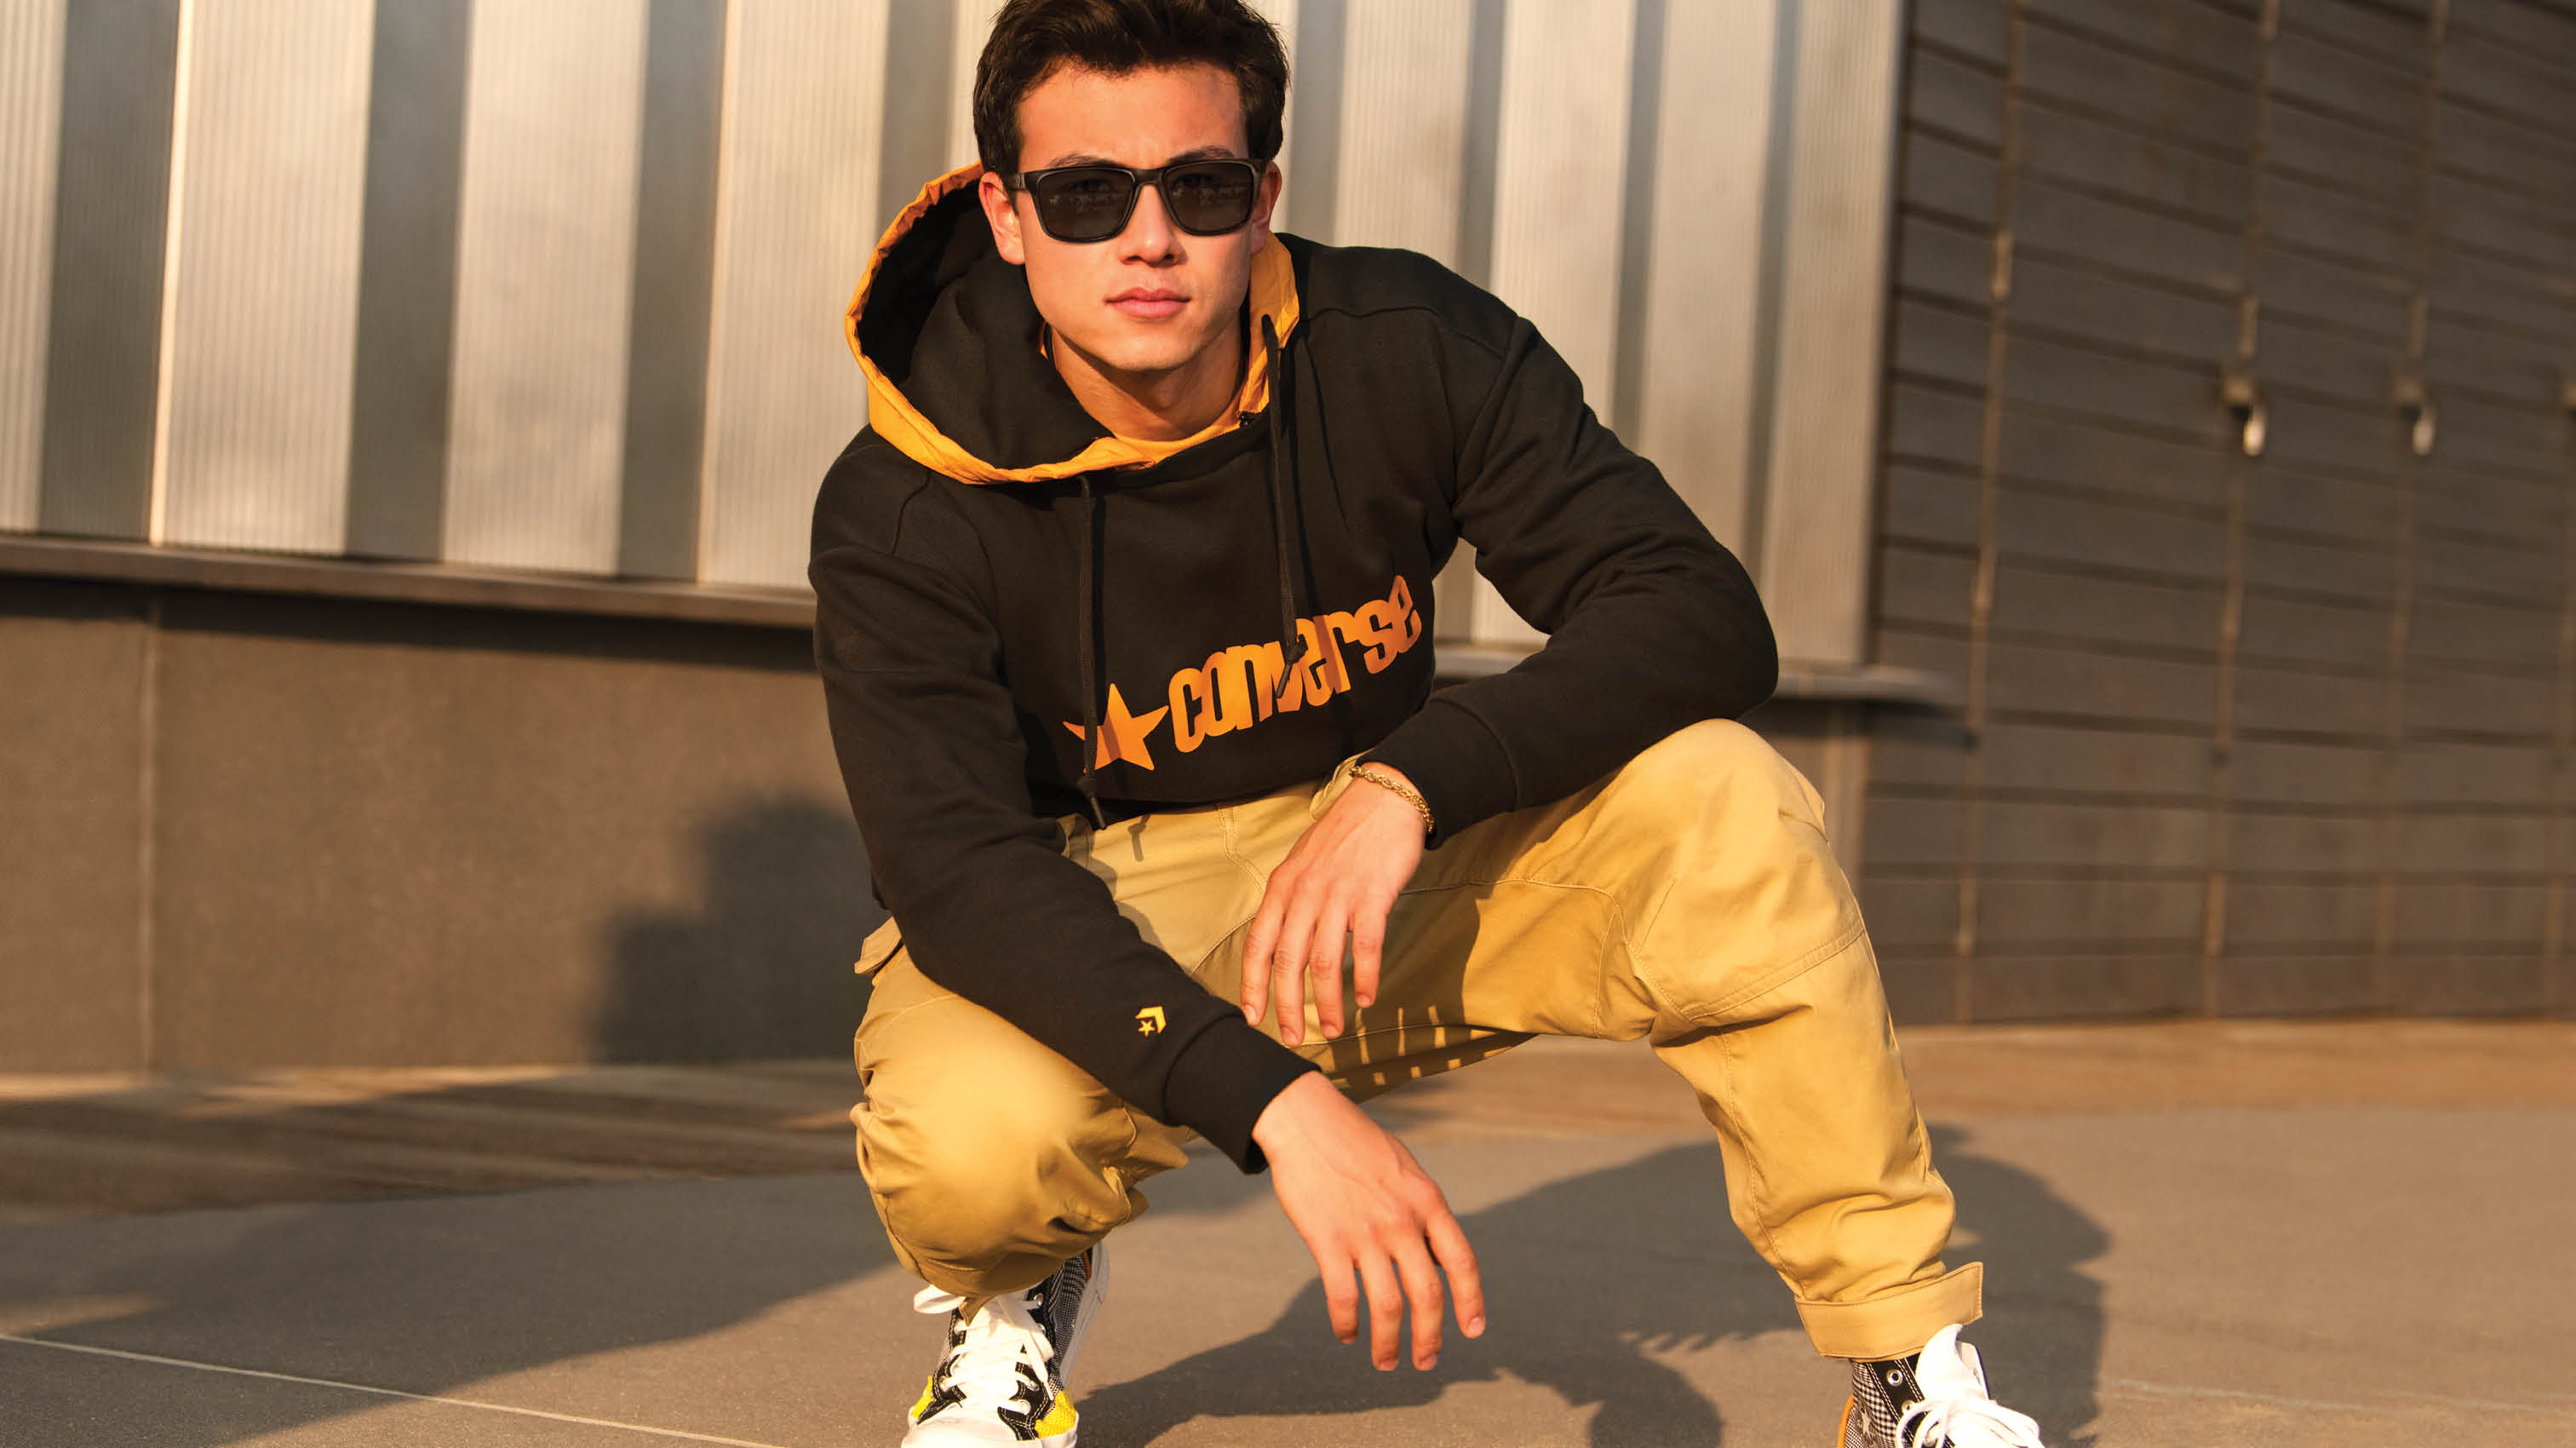 Model wearing yellow shirt and Converese glasses